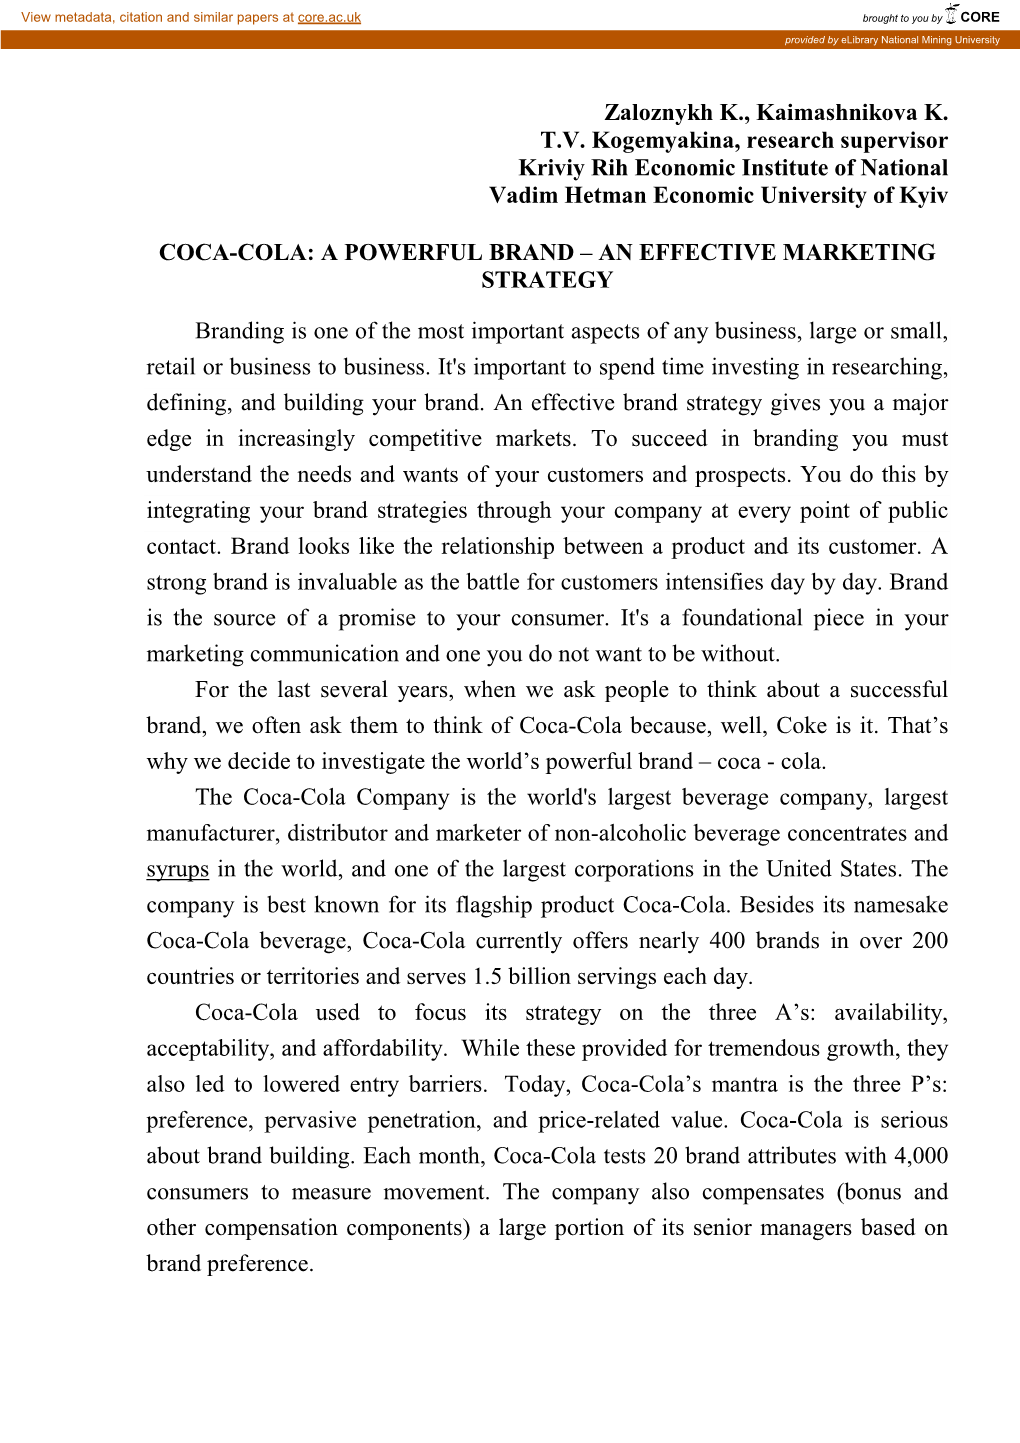 Coca-Cola: a Powerful Brand – an Effective Marketing Strategy